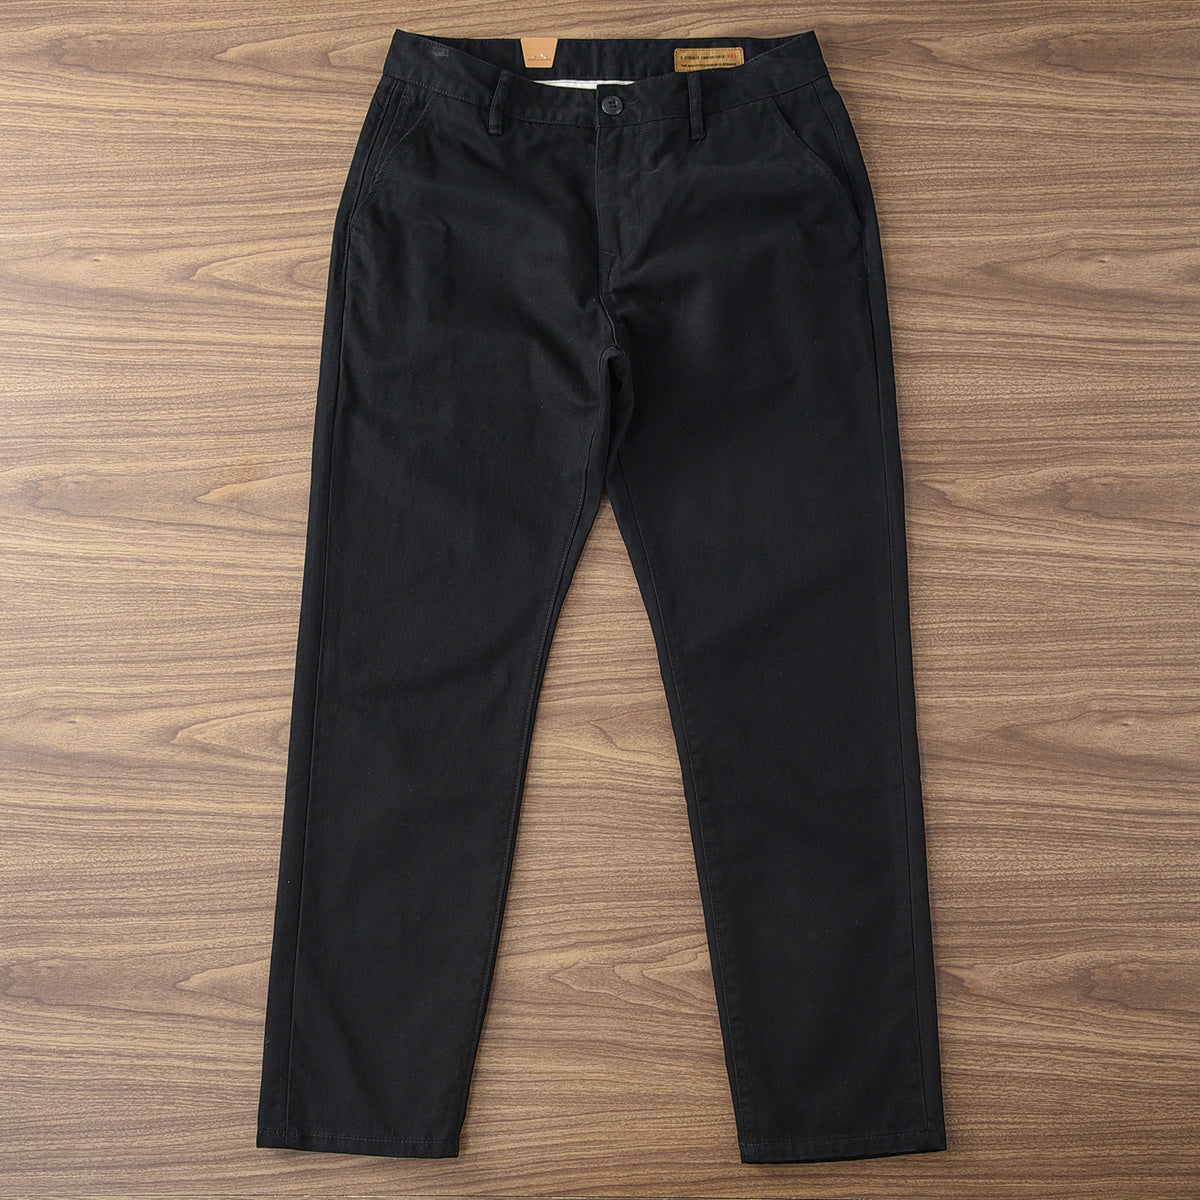 Twill Cotton Men's Casual Pants Basic Loose Straight Casual Long Pants